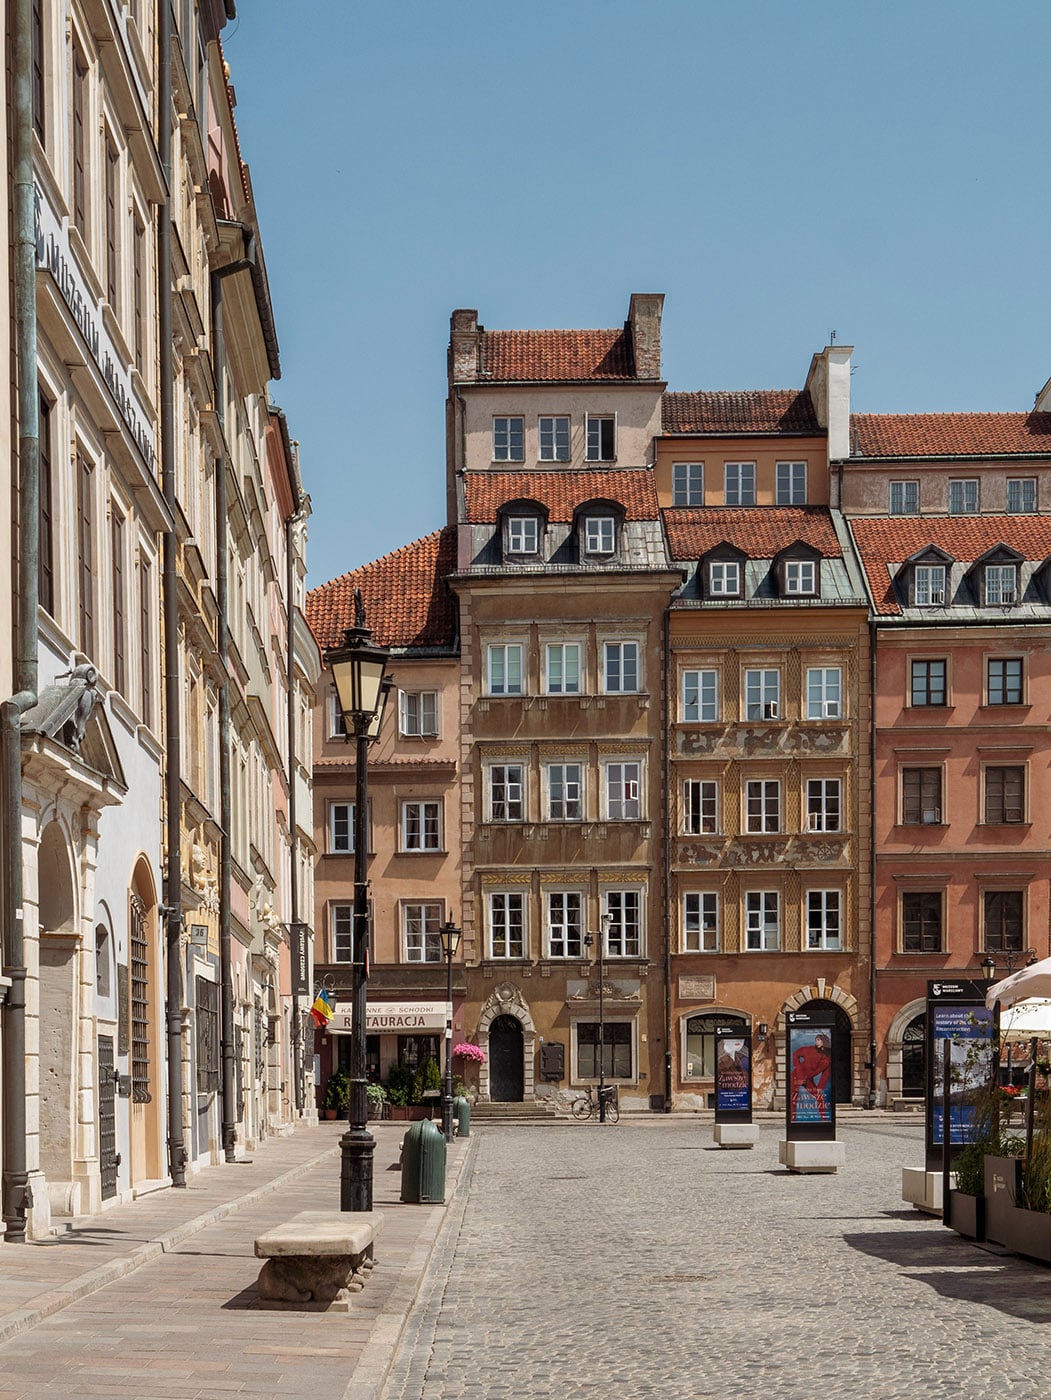 The 10th most beautiful photo spots in Warsaw 3